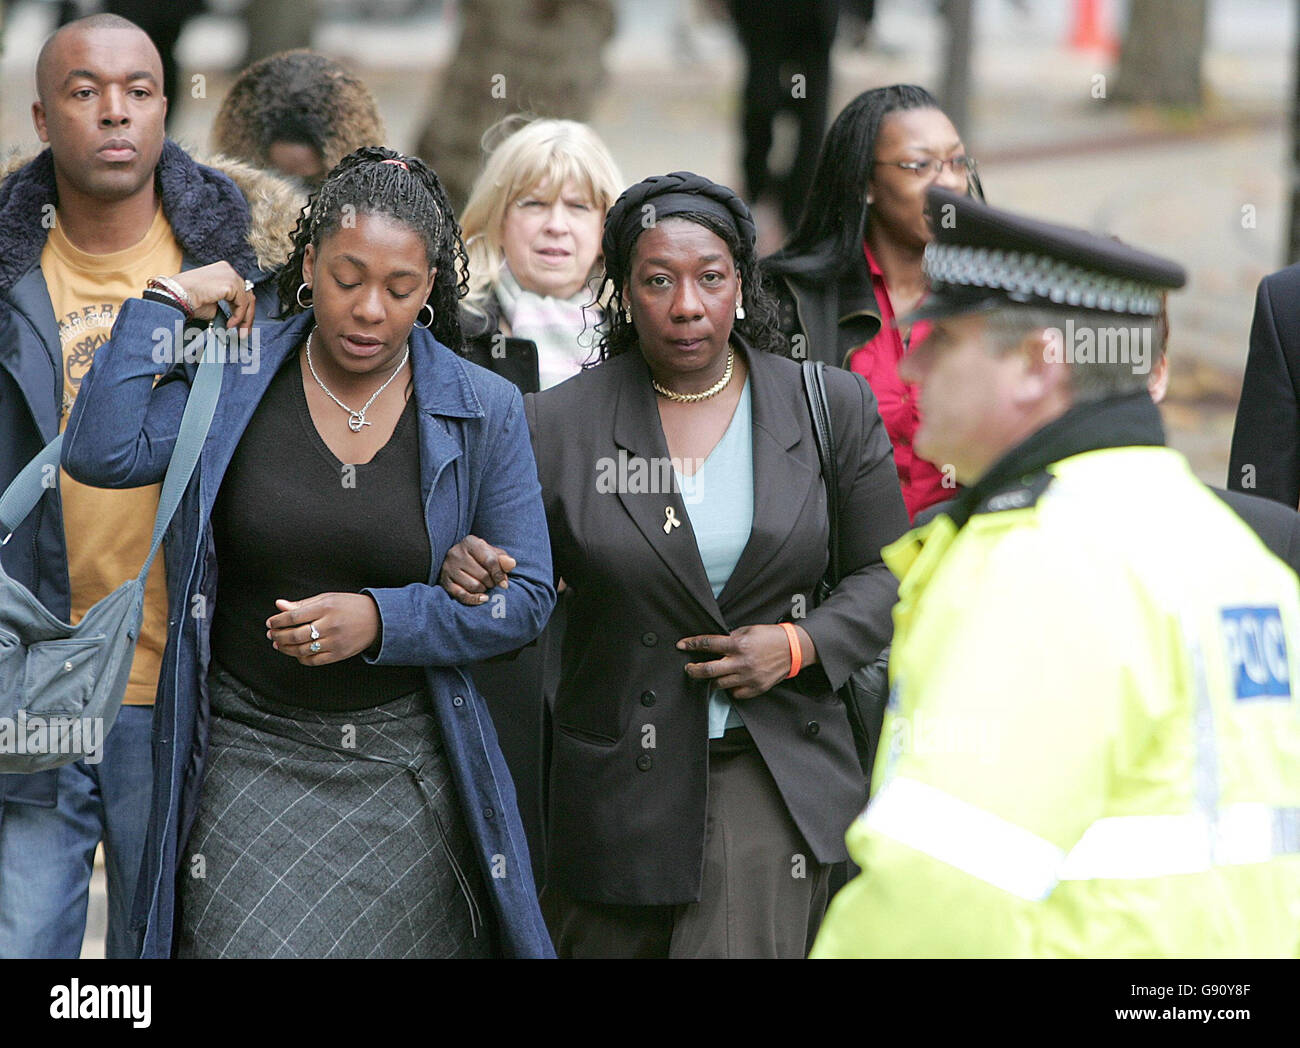 Gee Verona-Walker (centre), mother of Anthony Walker, arrives at Liverpool Crown Court with family members, Tuesday November 15 2005, where the two men accused of bludgeoning Anthony Walker to death with an axe go on trial. Paul Taylor and Michael Barton, aged 20 and 17, allegedly attacked the 18-year-old in July as he walked through Huyton, Merseyside, with his girlfriend and cousin. See PA story COURTS Axe. PRESS ASSOCIATION Photo. Photo credit should read: Martin Rickett/PA Stock Photo